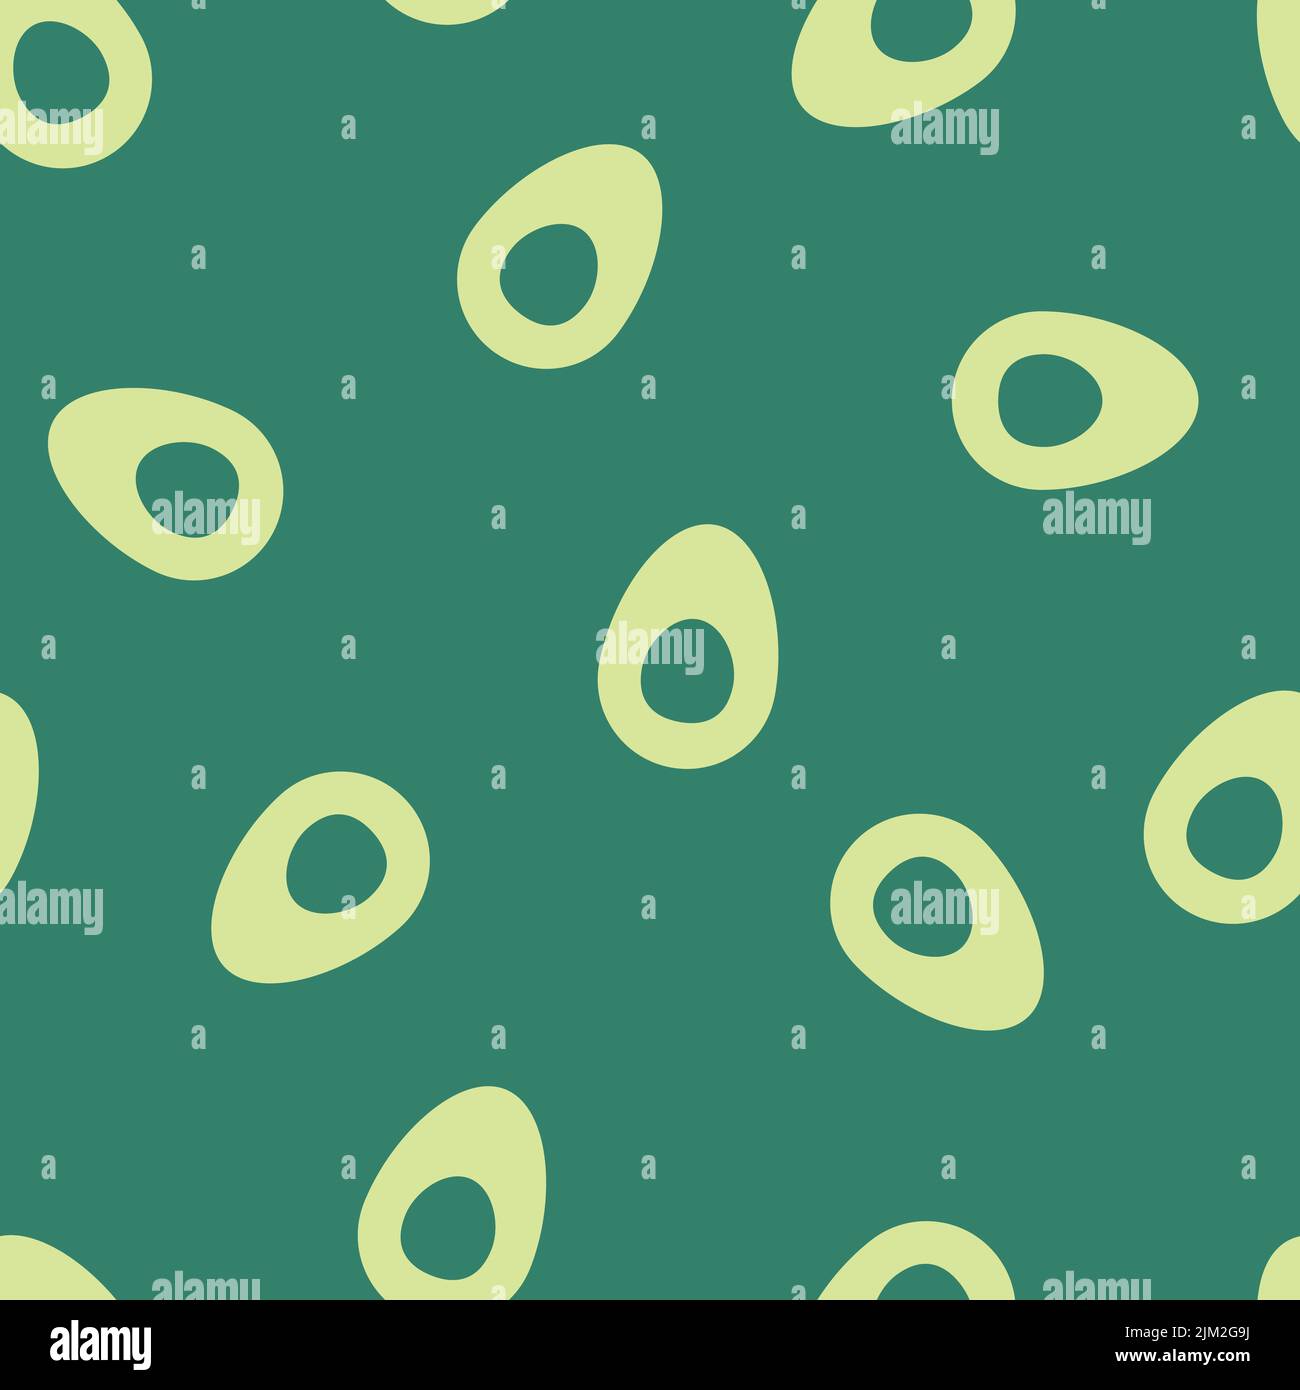 Seamless pattern with avocado halves on green background. Vector illustration in minimalist style. Simple trendy print for textile, fabric, home decor Stock Vector